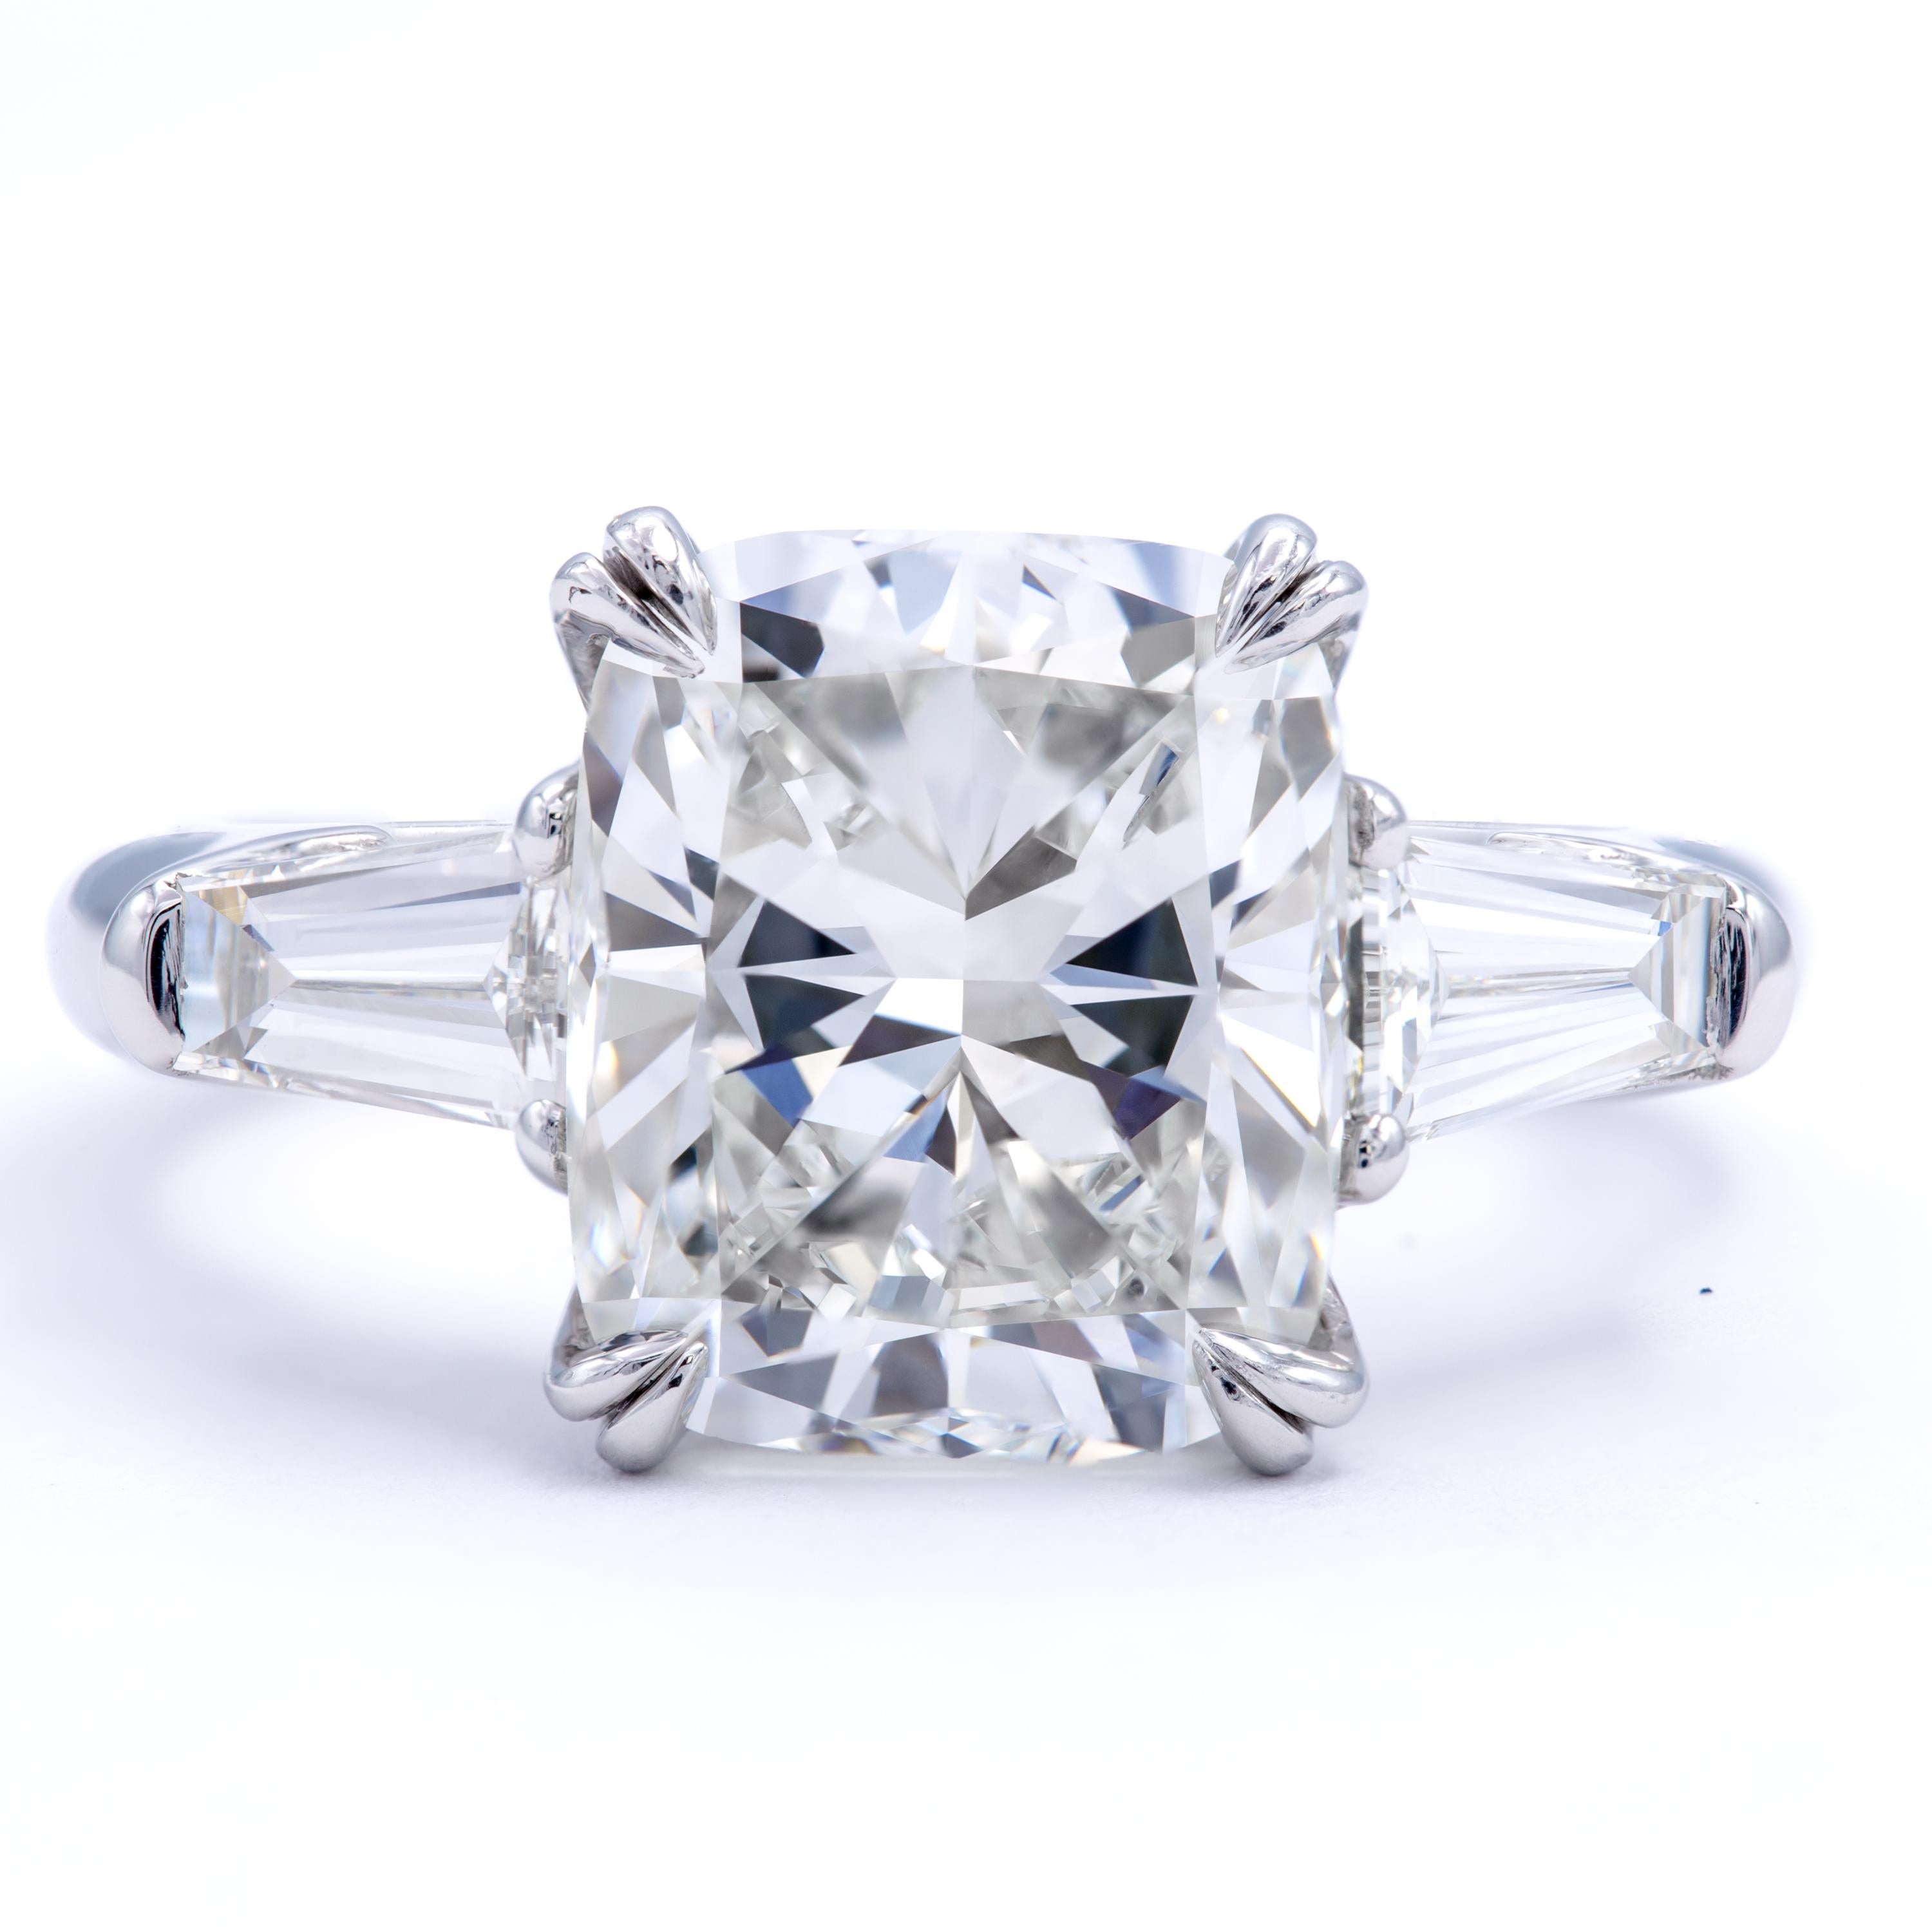 Rosenberg Diamonds 4.12 carat Cushion cut I color VS2 clarity is accompanied by a GIA certificate. This gorgeous Radiant is full of brilliance and it is set in a handmade platinum setting with perfectly matched pair of tapered baguette side stones